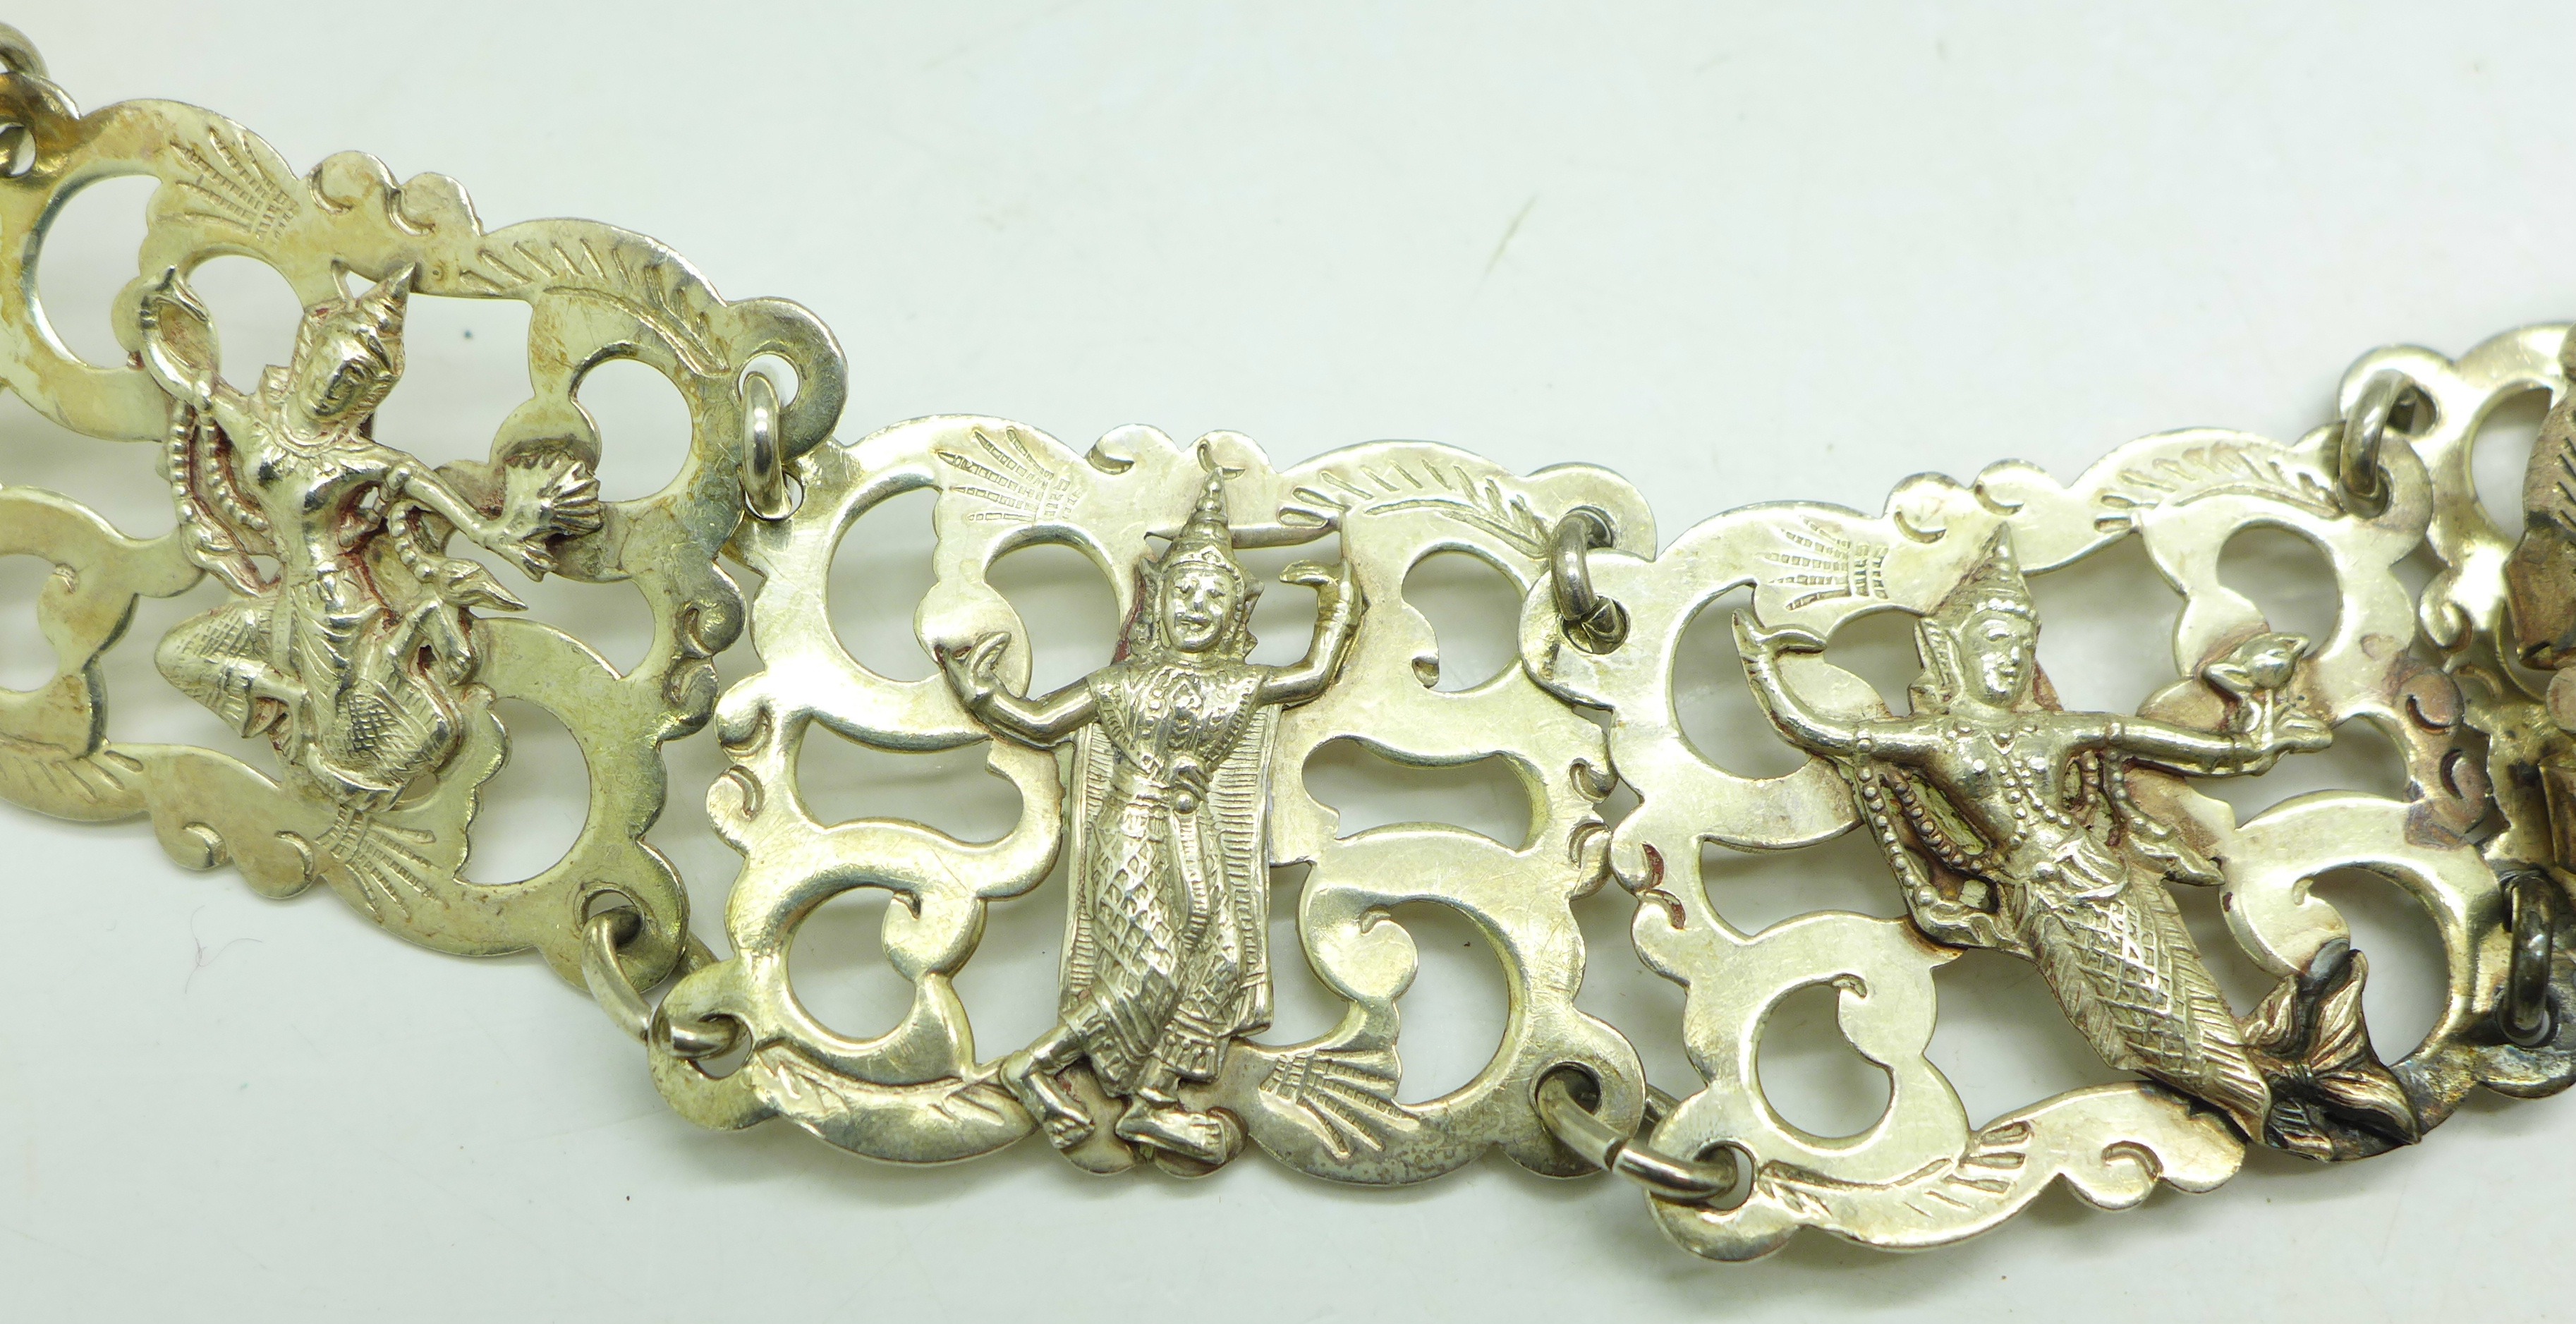 A Siam sterling silver belt, 193g, (fastening clip requires repair) - Image 5 of 8